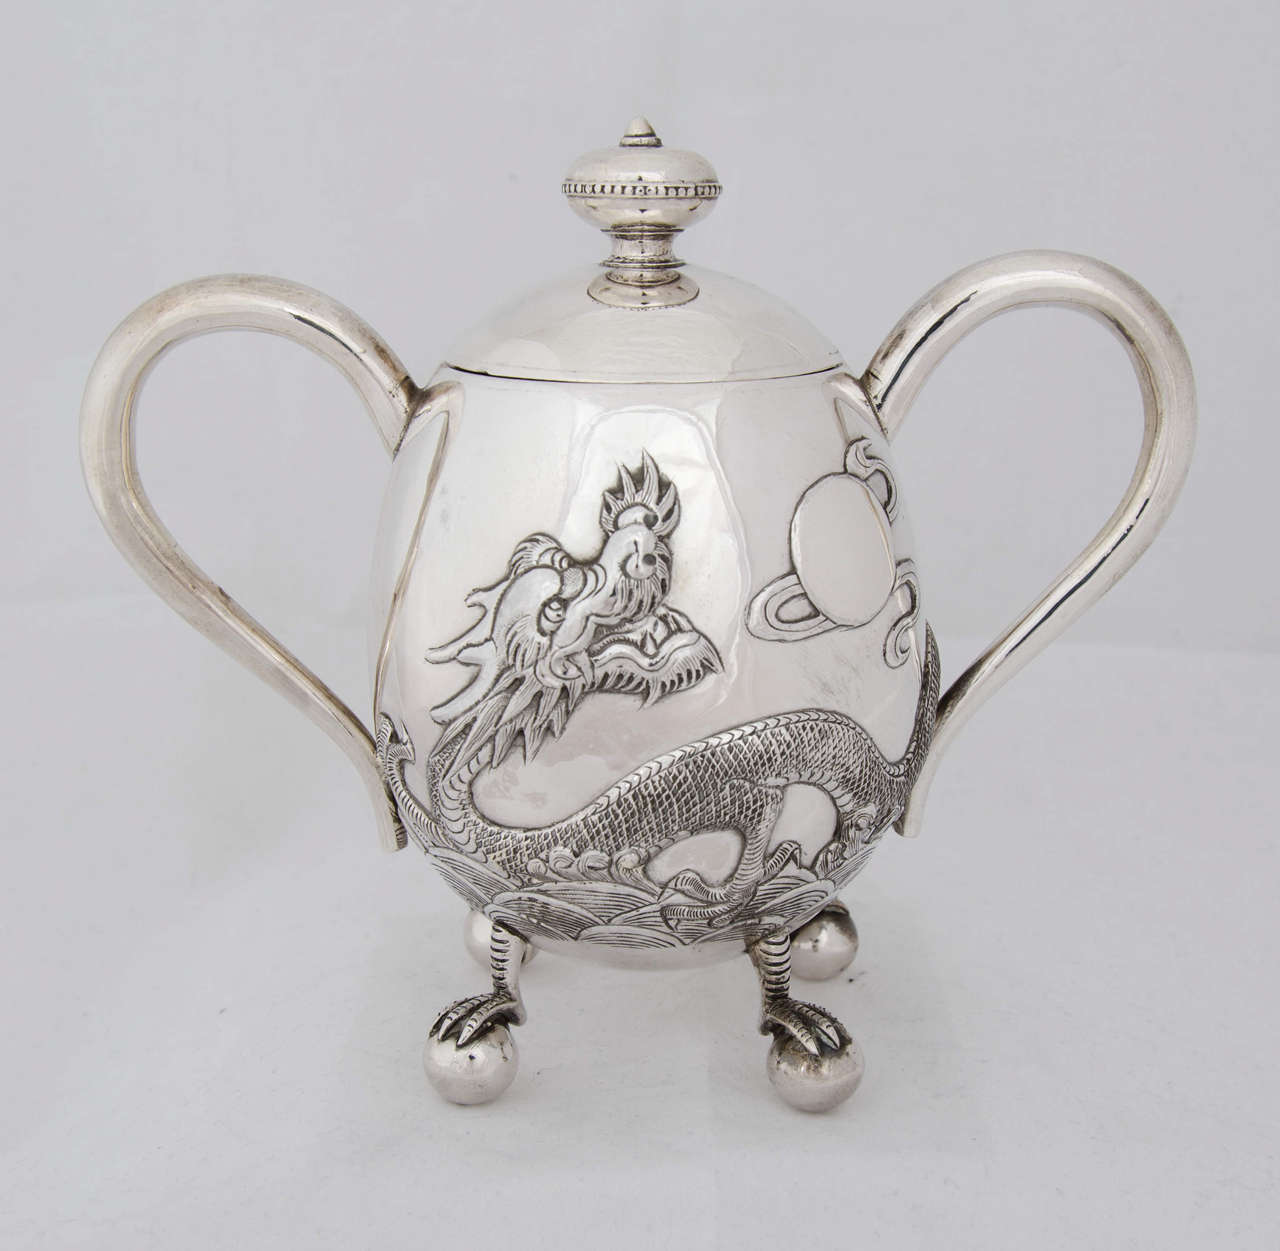 An unusual 3-piece Chinese export silver tea set
decorated with a dragon on a plain background.
Each piece sits on ball and claw feet.
Made by Hone Wo
Total weight is 1088gms.
 